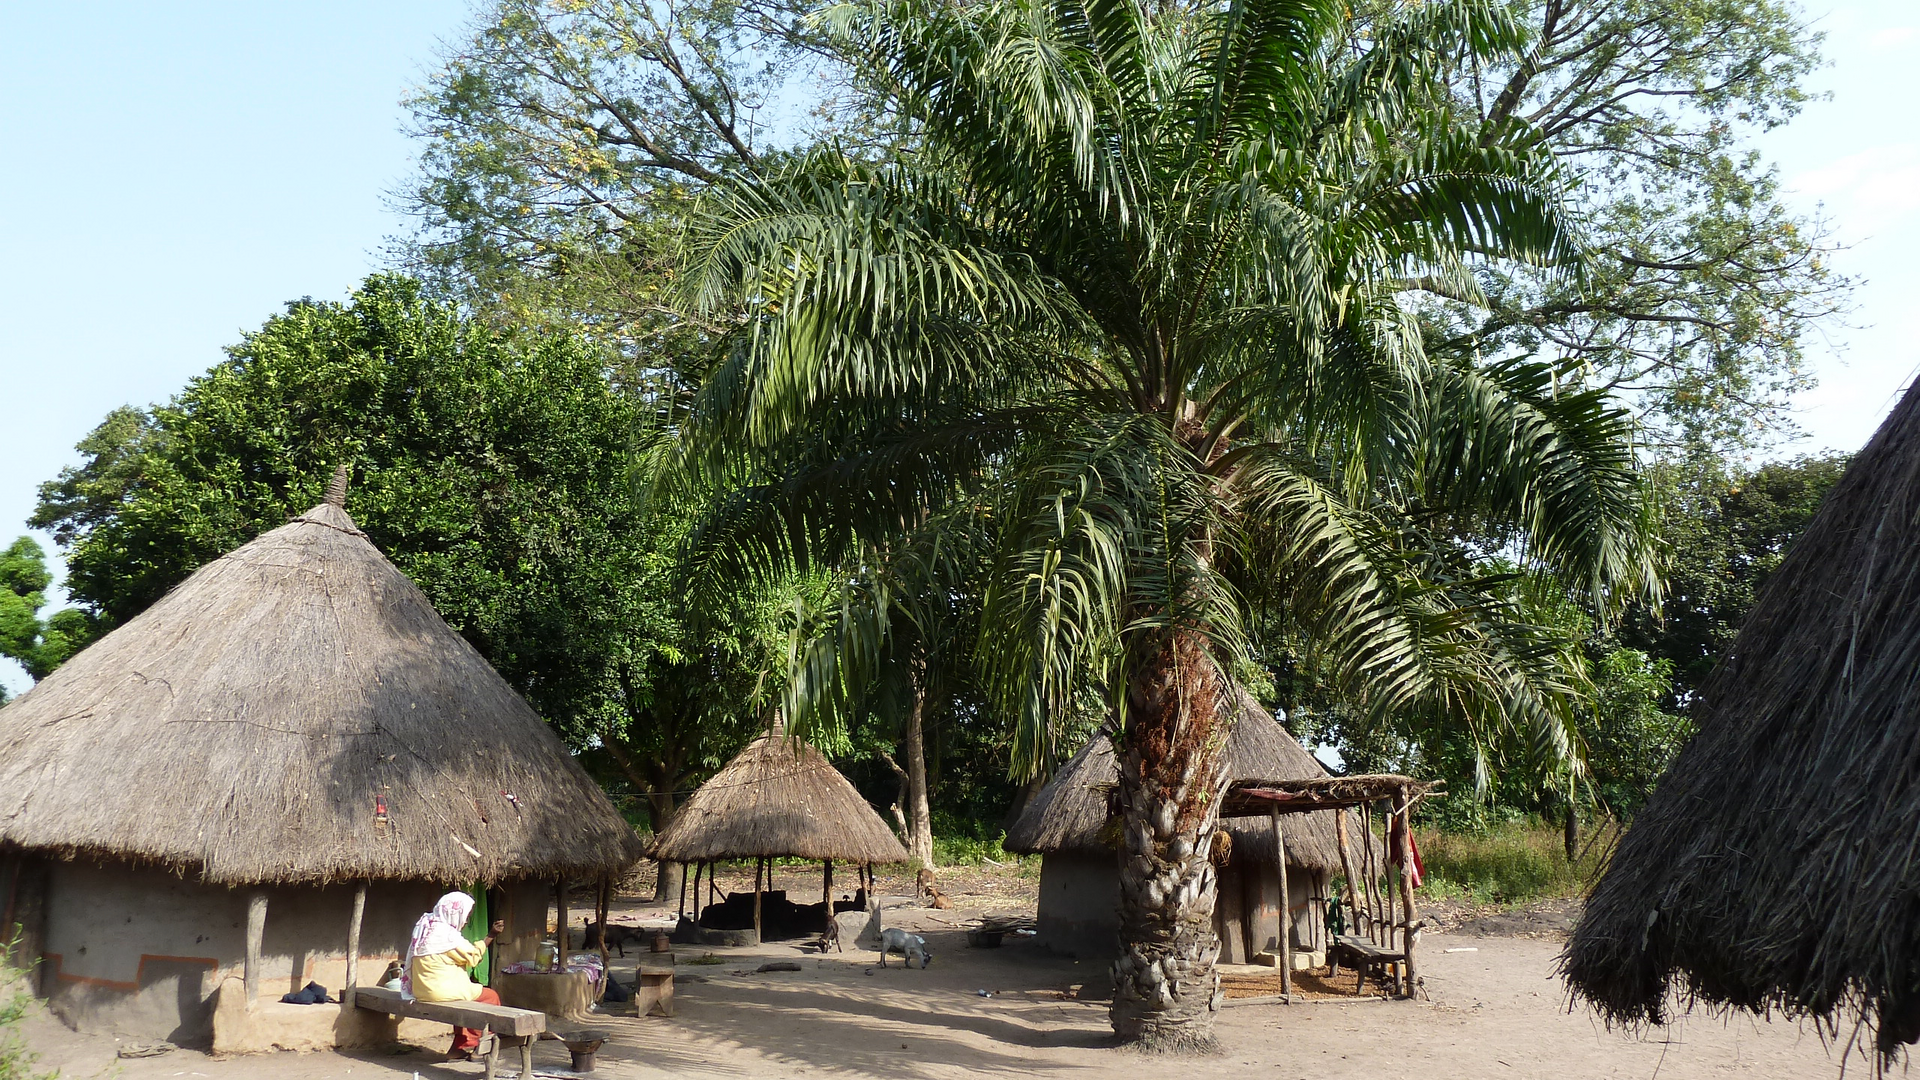 The picture shows a rural village in Upper Guinea, with three huts with thatched roofs on the left and a large tree next to them. In front of one hut a person is sitting on a bench. Goats can be seen between the h